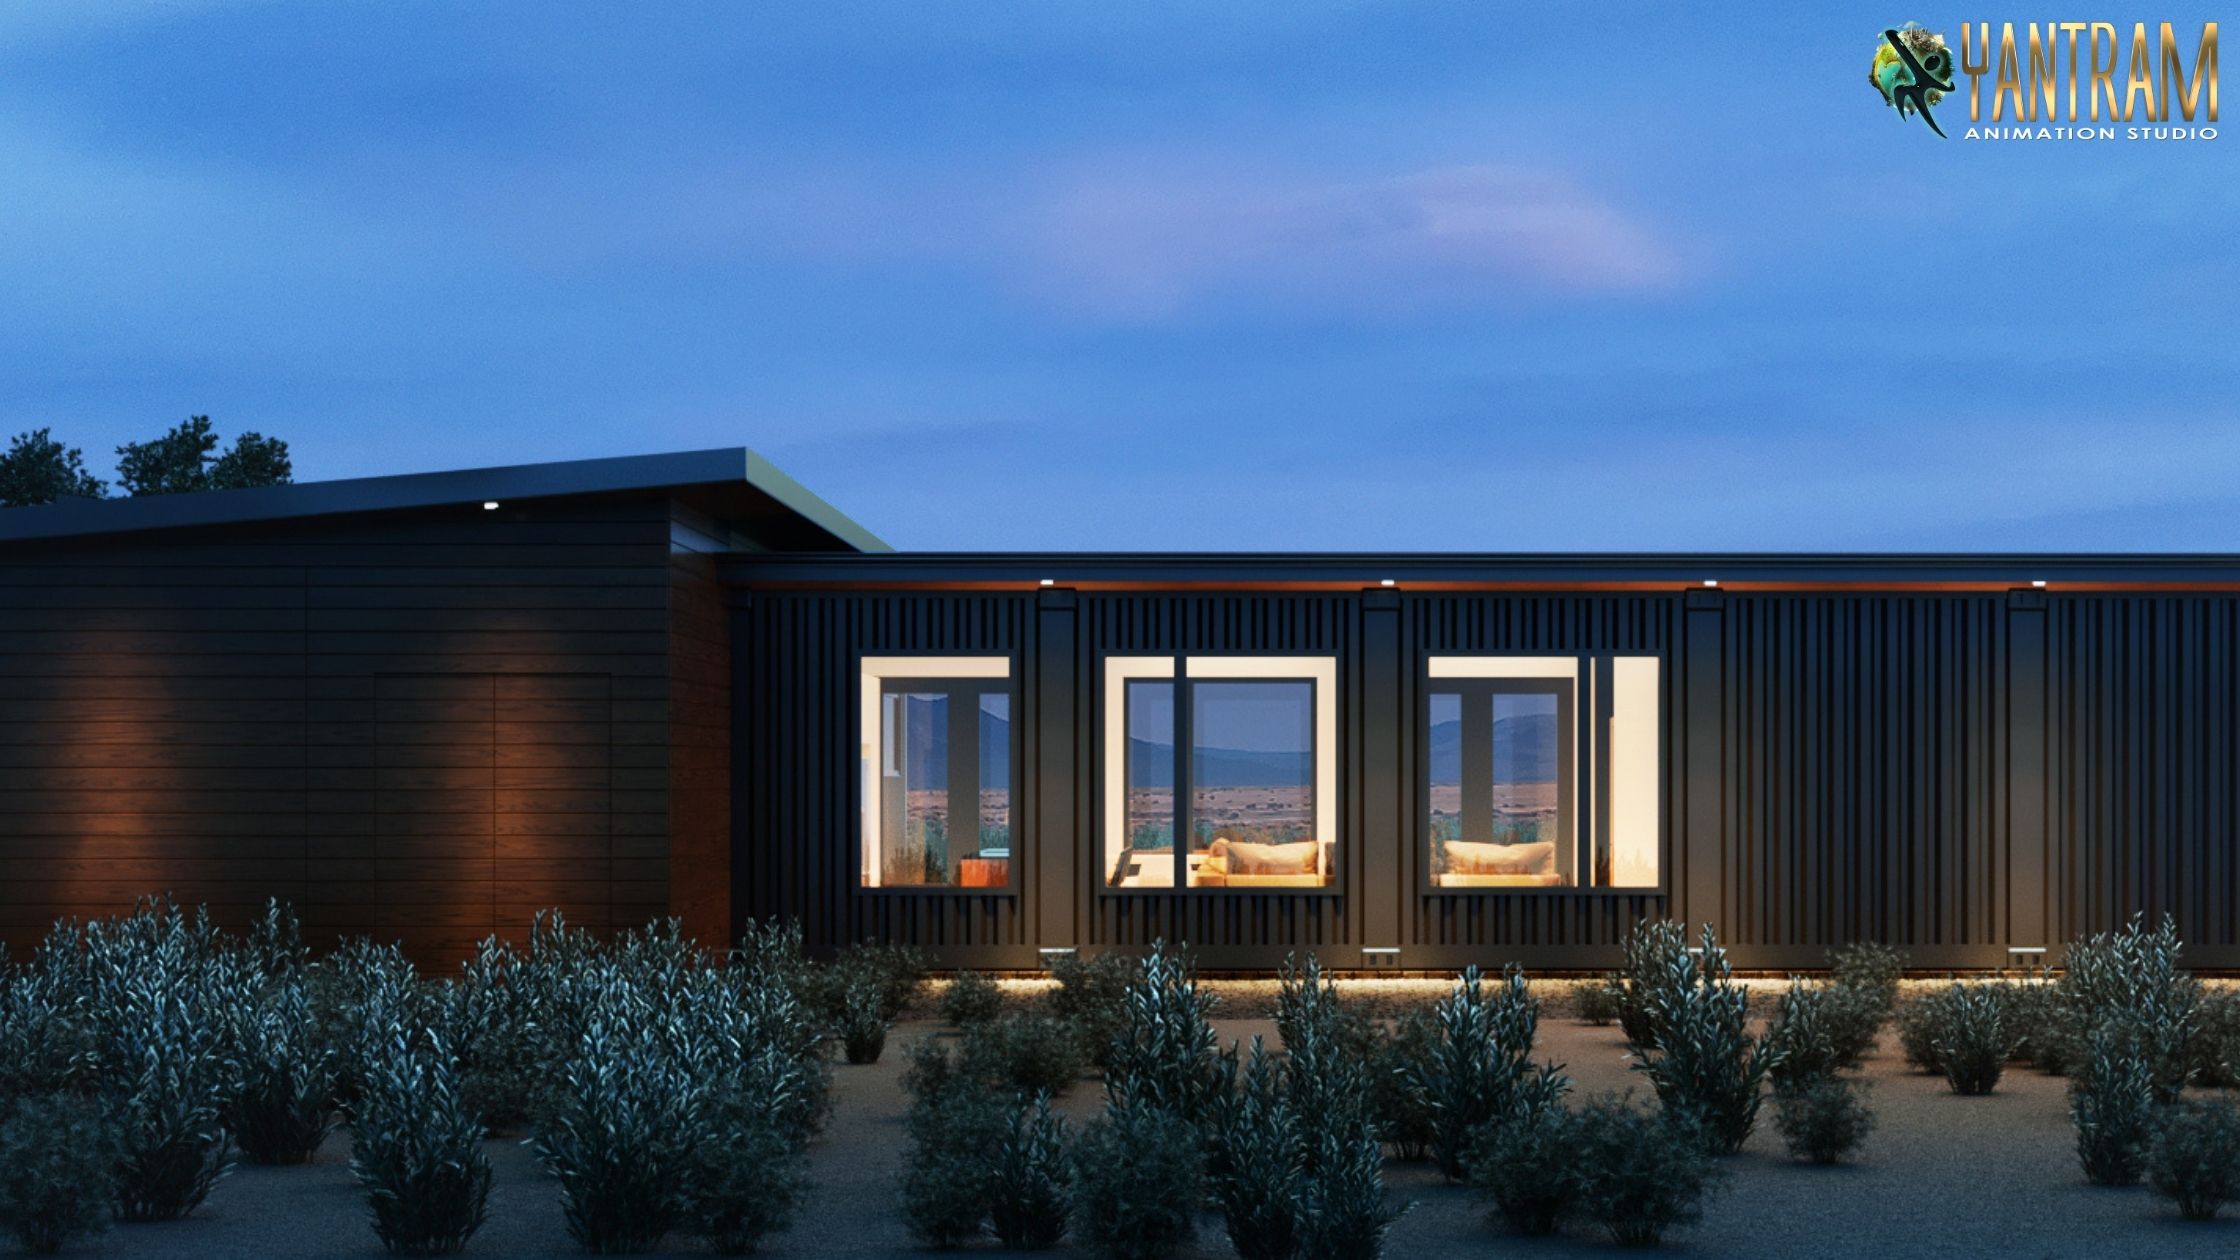 ​3d exterior modeling of relaxing container house by Yantram 3d Architectural animation studio-Meridian, Idaho